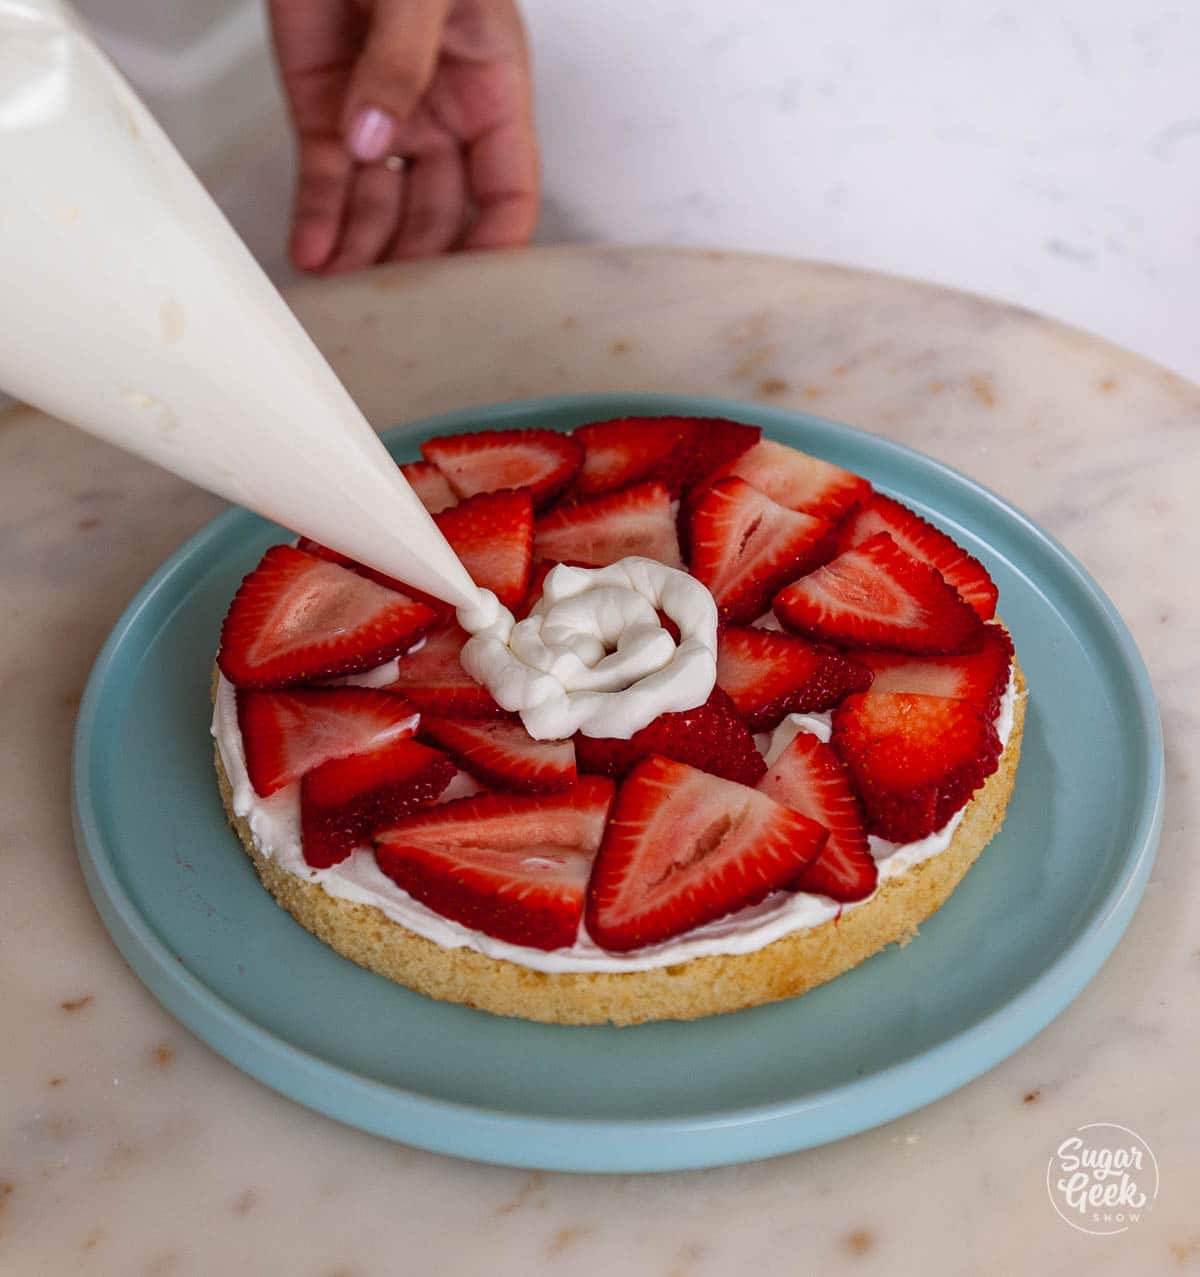 adding whipped cream to strawberries on a slice of cake